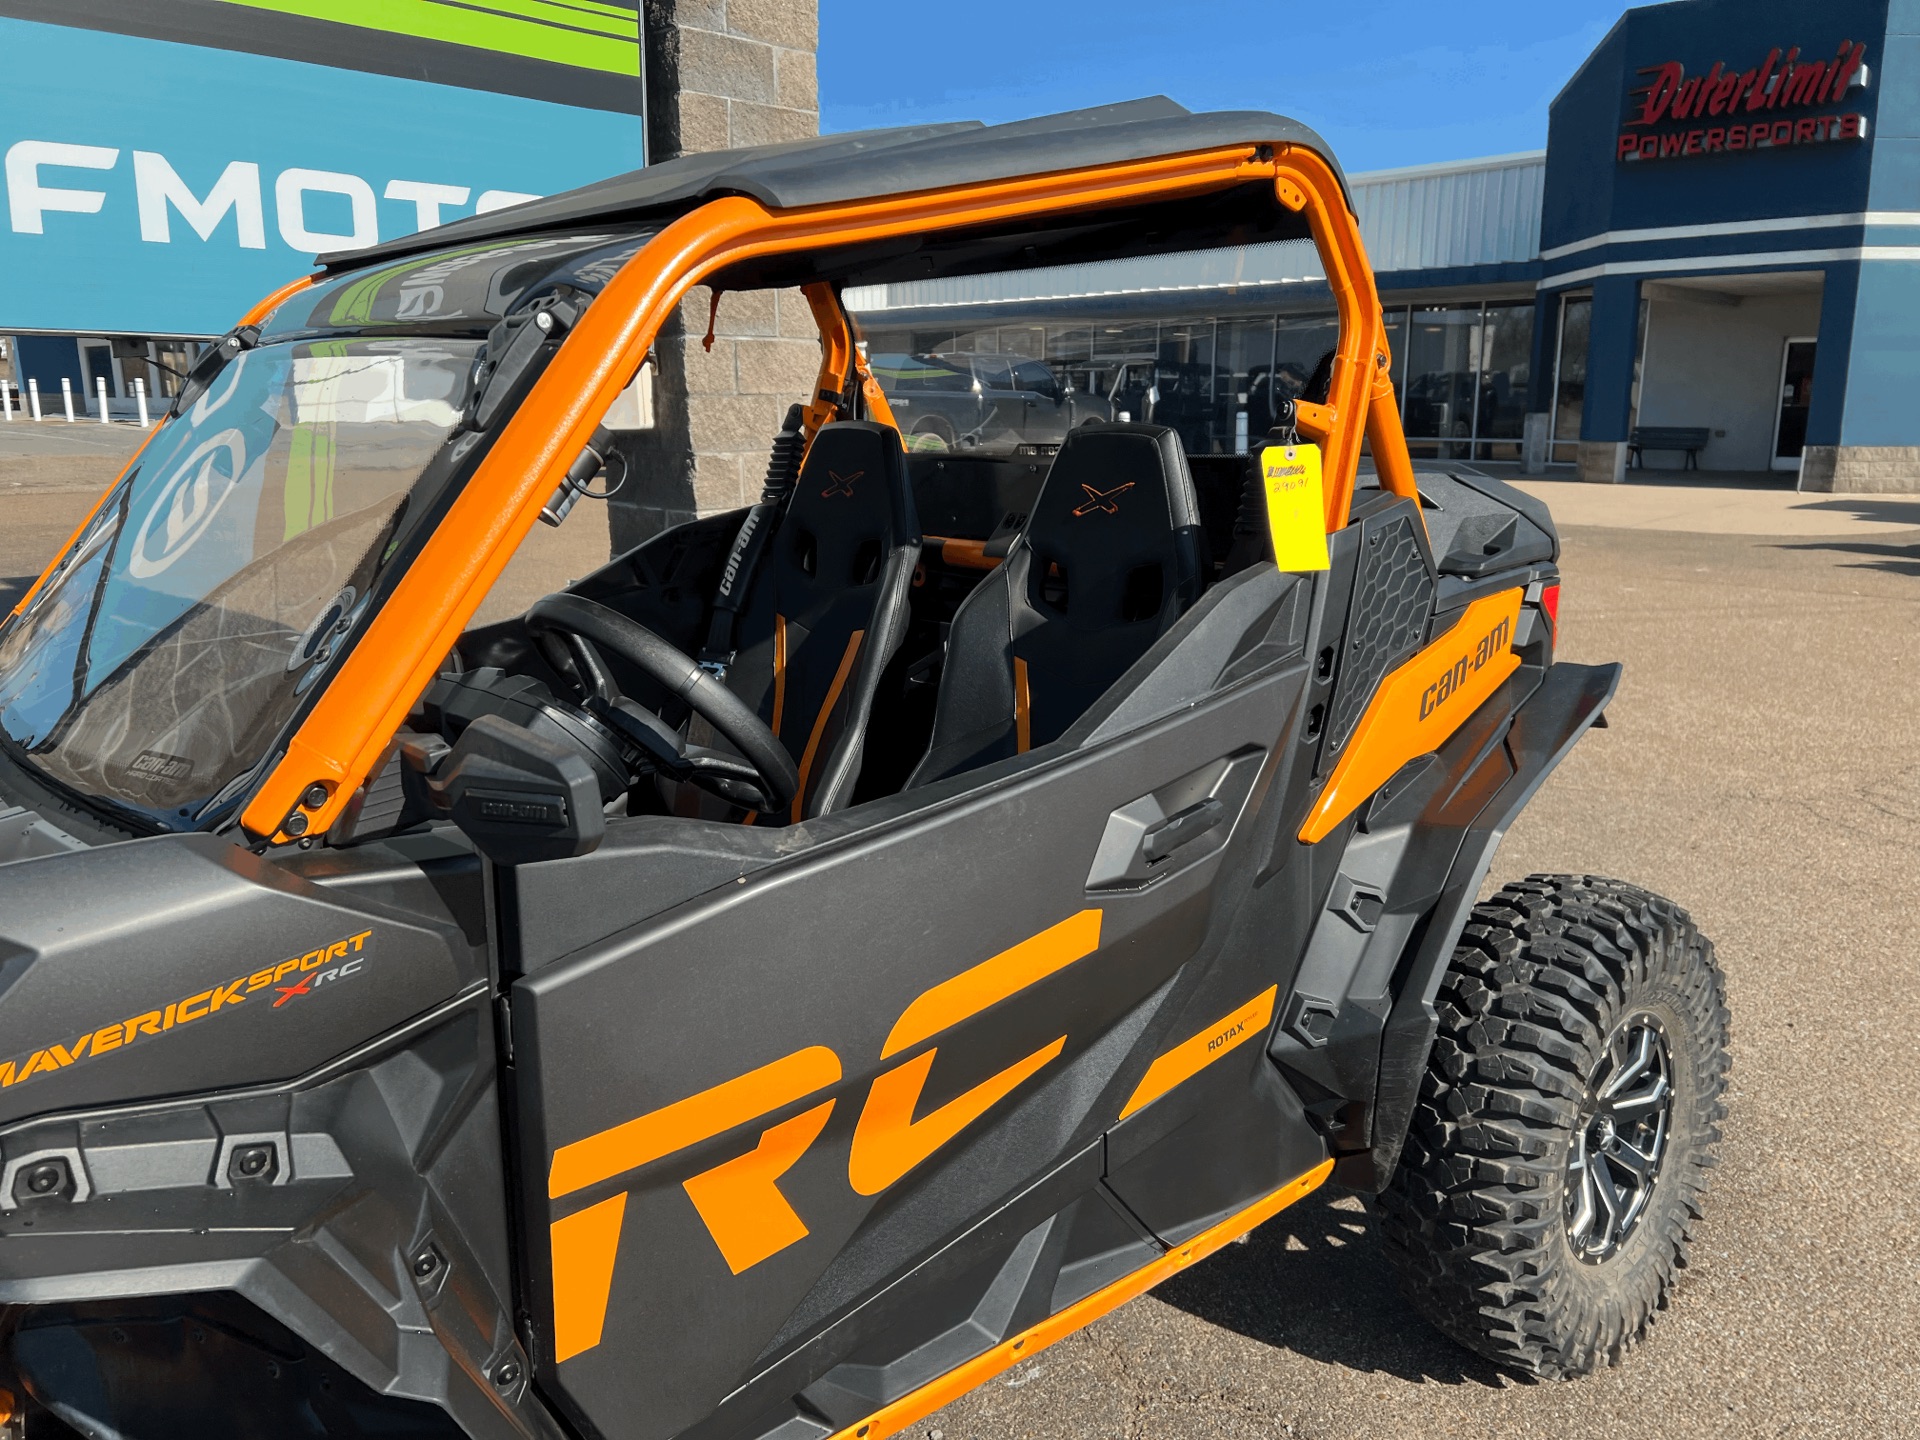 2020 Can-Am Maverick Sport X RC 1000R in Dyersburg, Tennessee - Photo 6